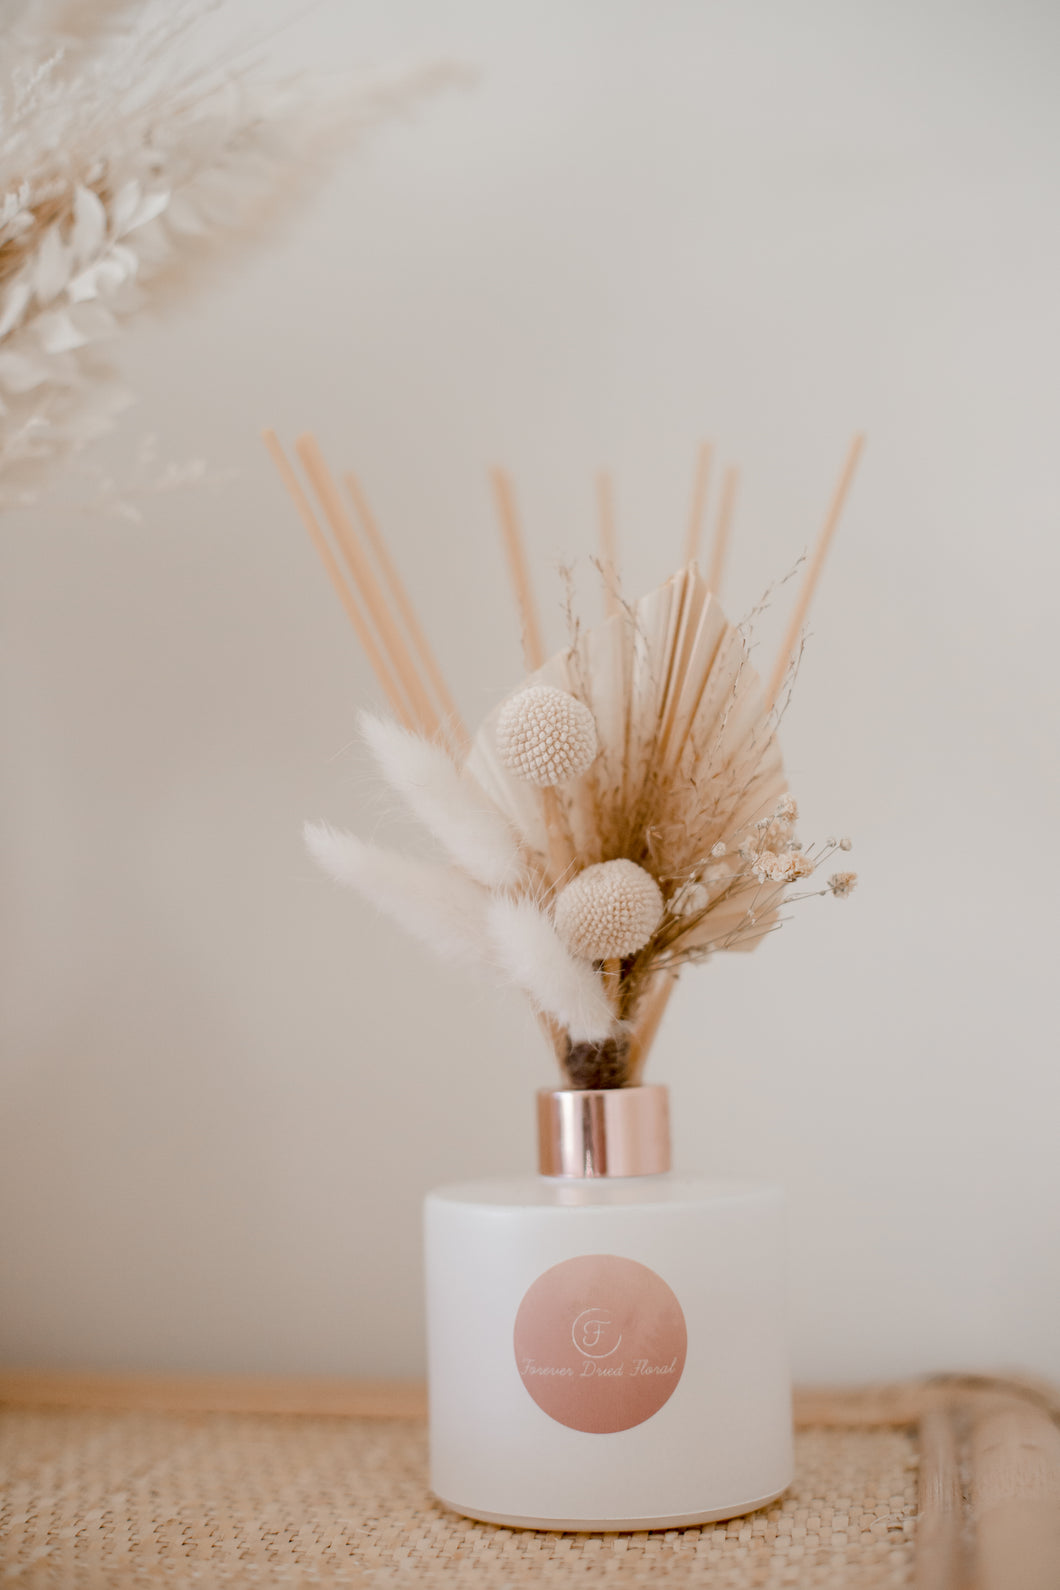 Floral diffusers